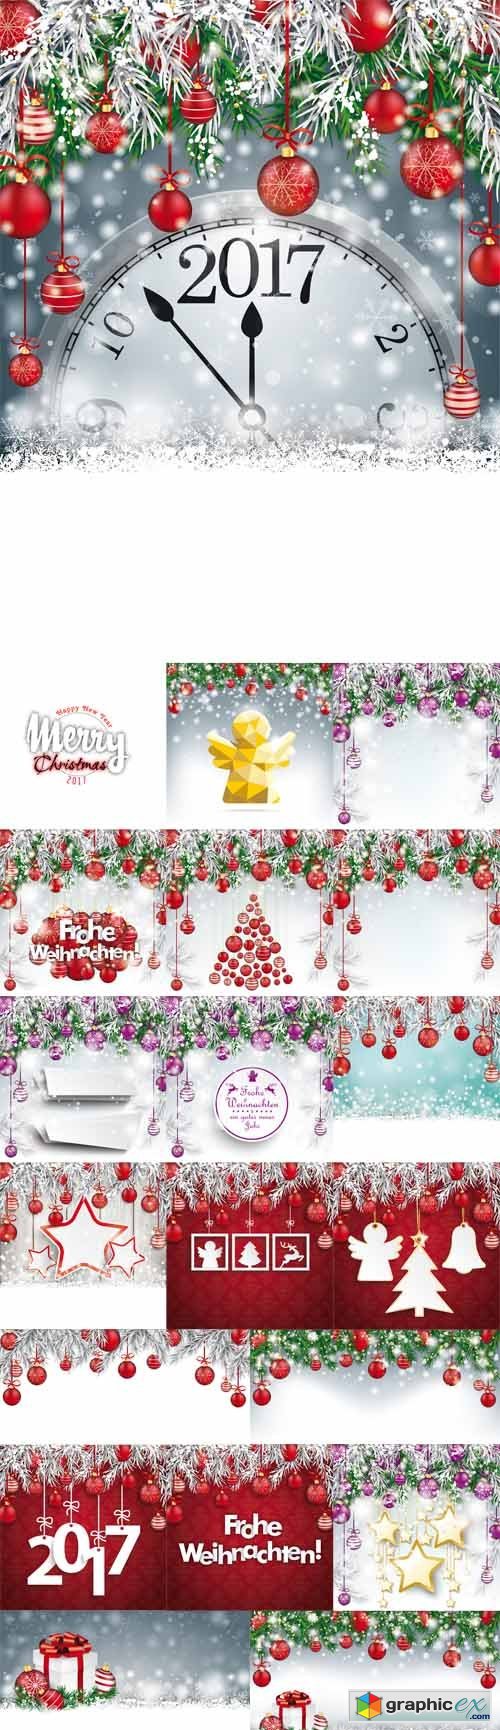 Christmas Frozen Backgrounds with Baubles Banners